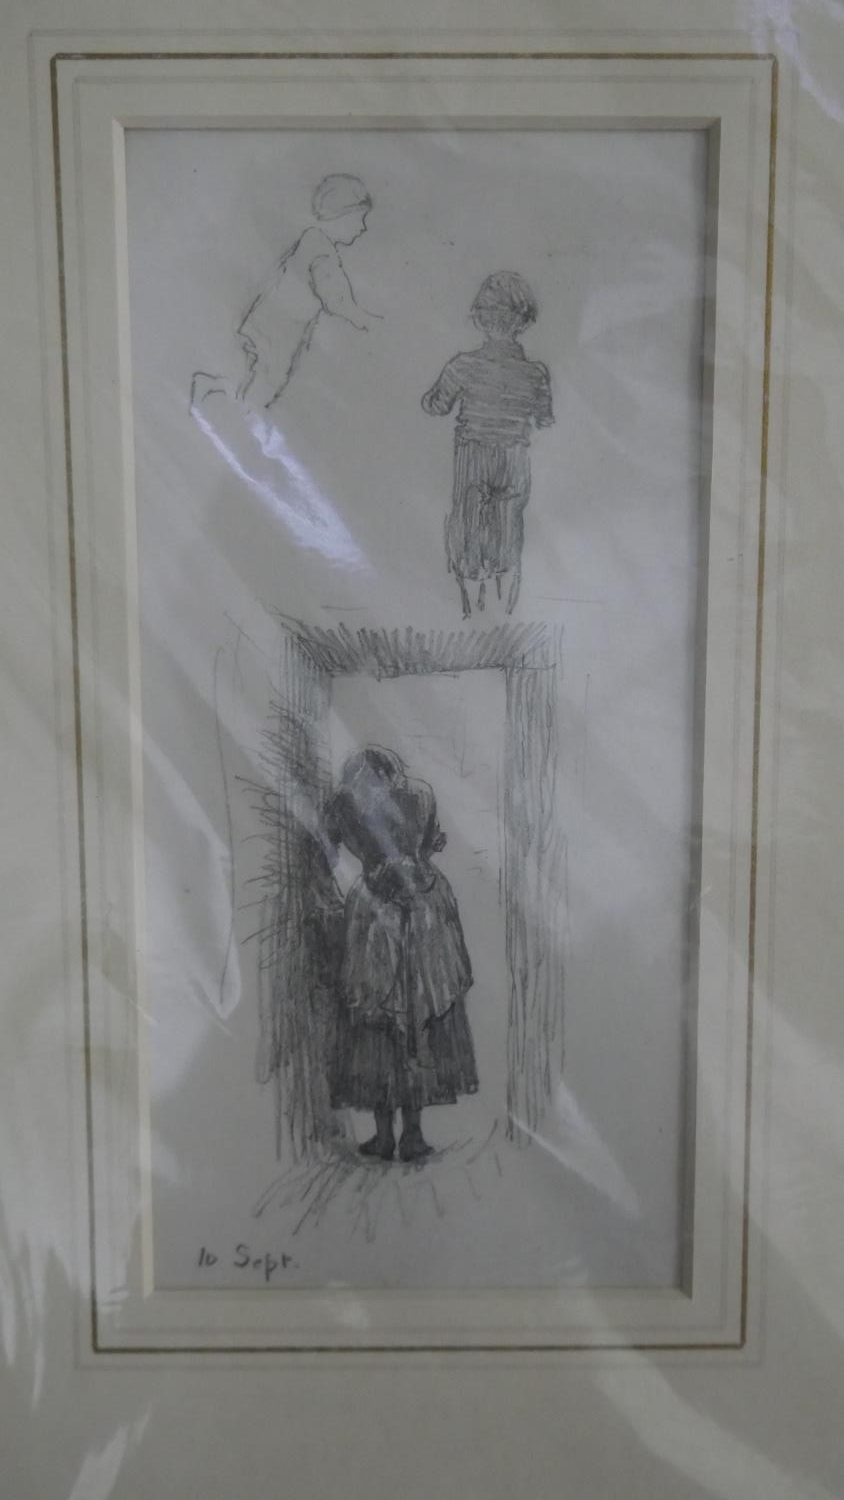 Arthur Hopkins (1848 - 1930) An unframed pencil drawing from Whitby Sketchbook, along with a - Image 4 of 6